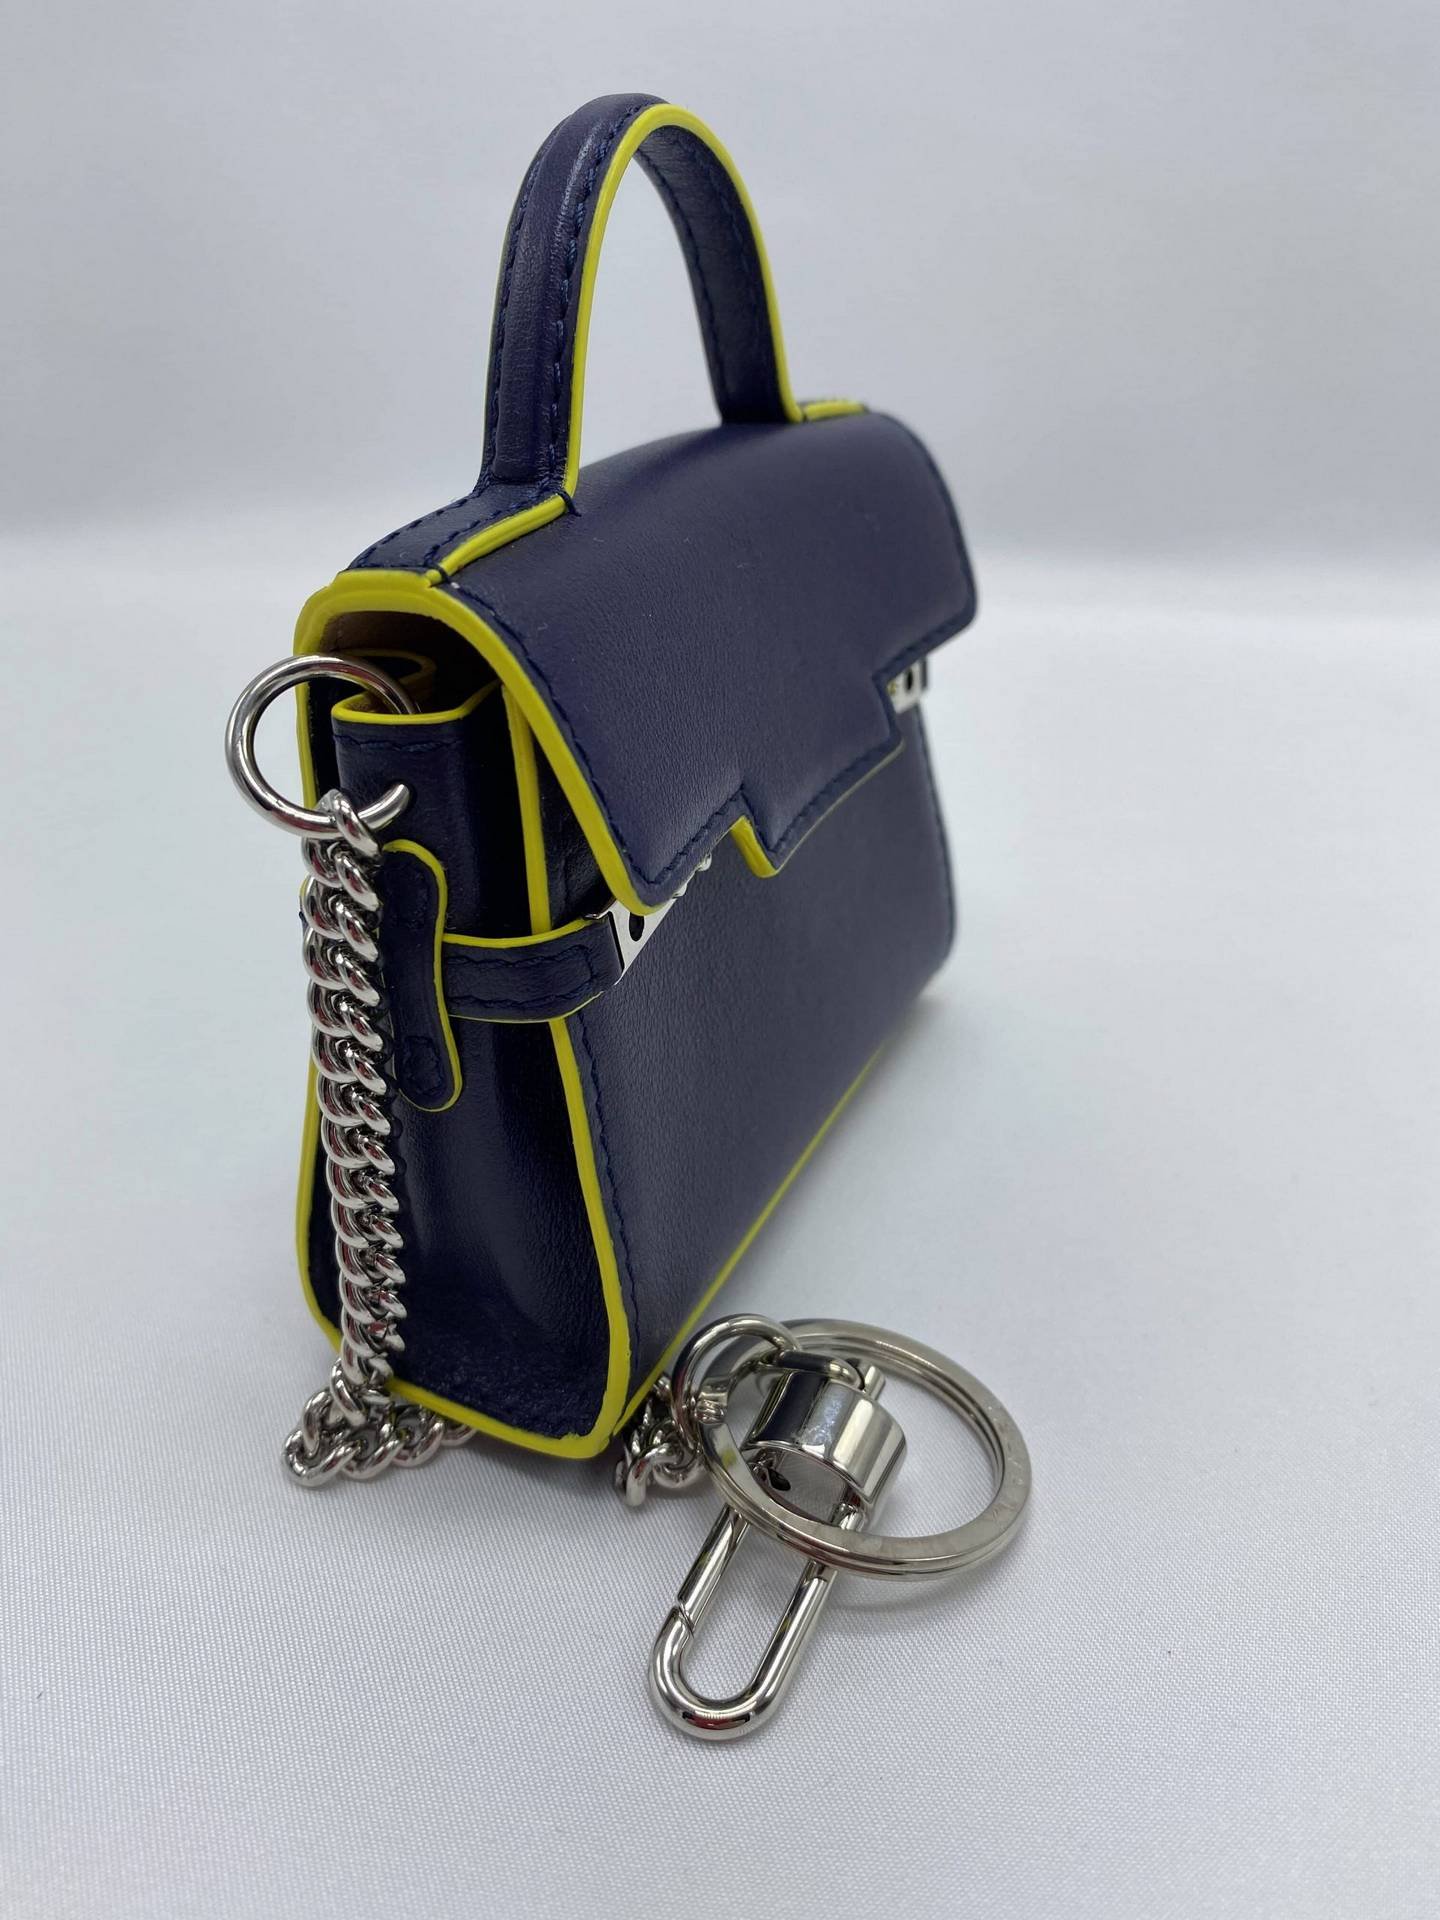 Delvaux Tempete Leather Bag Charm Key Ring